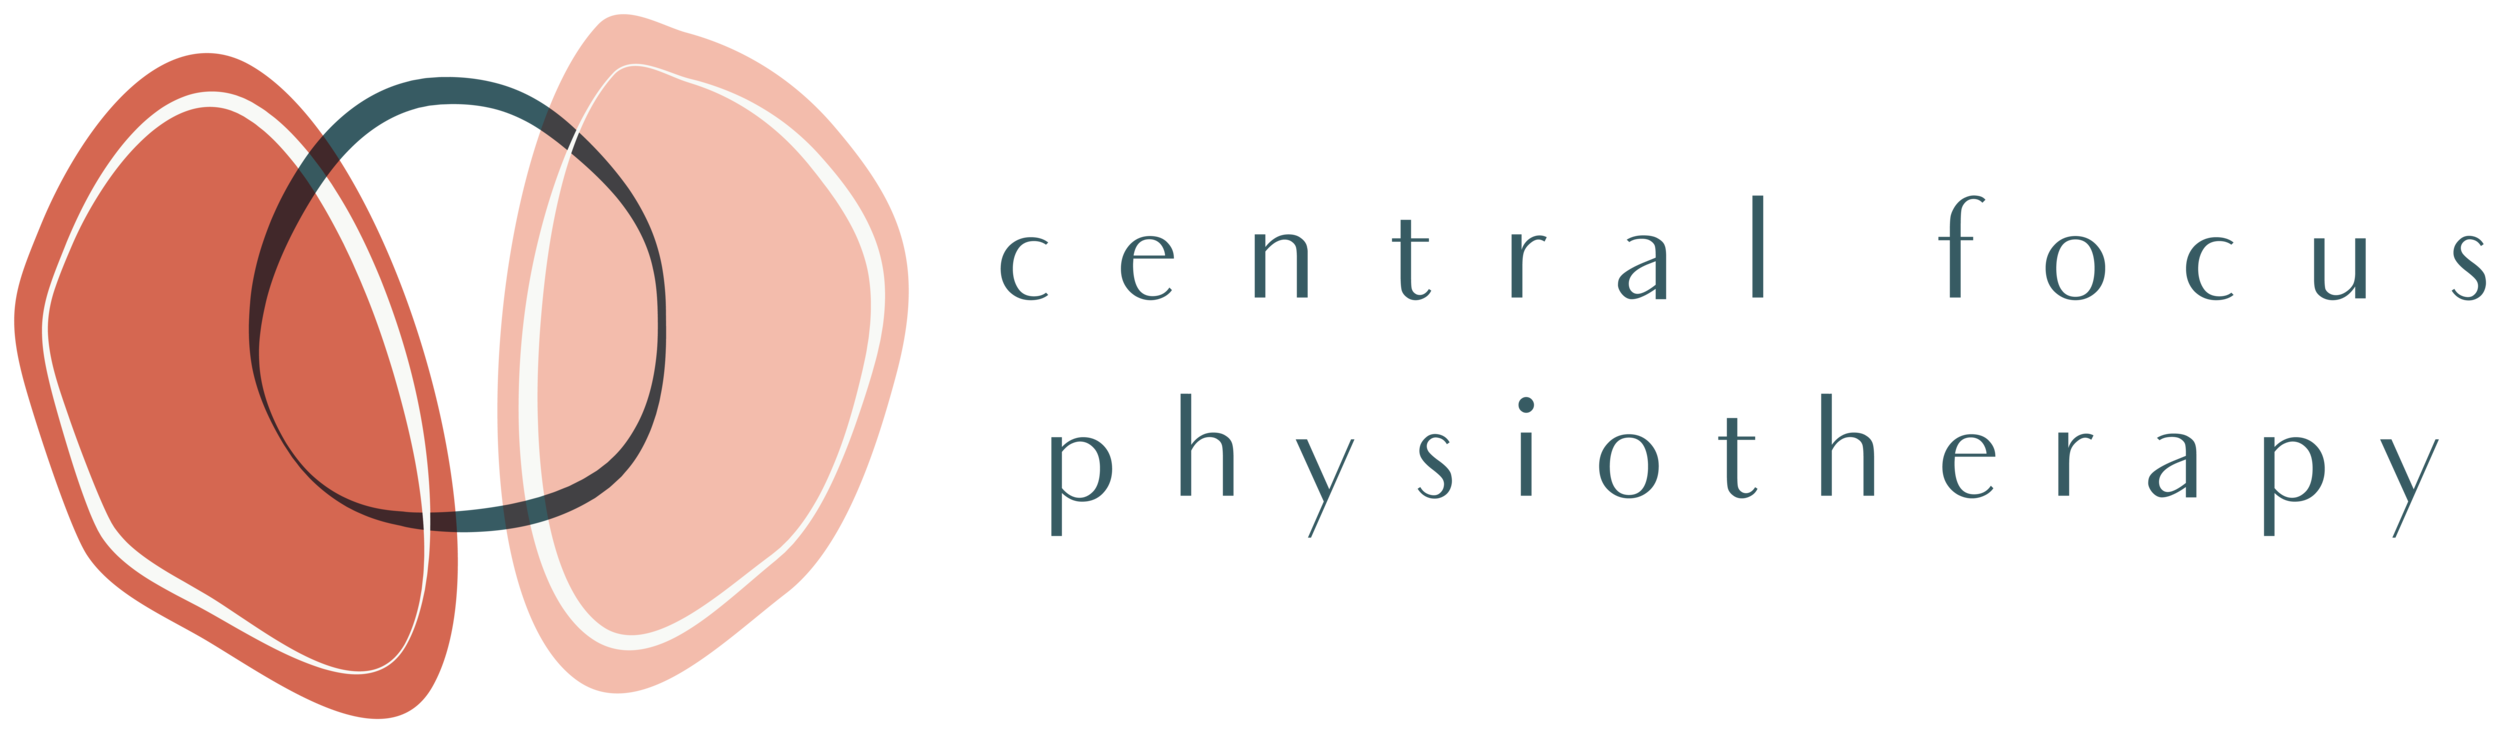 Central Focus Physiotherapy